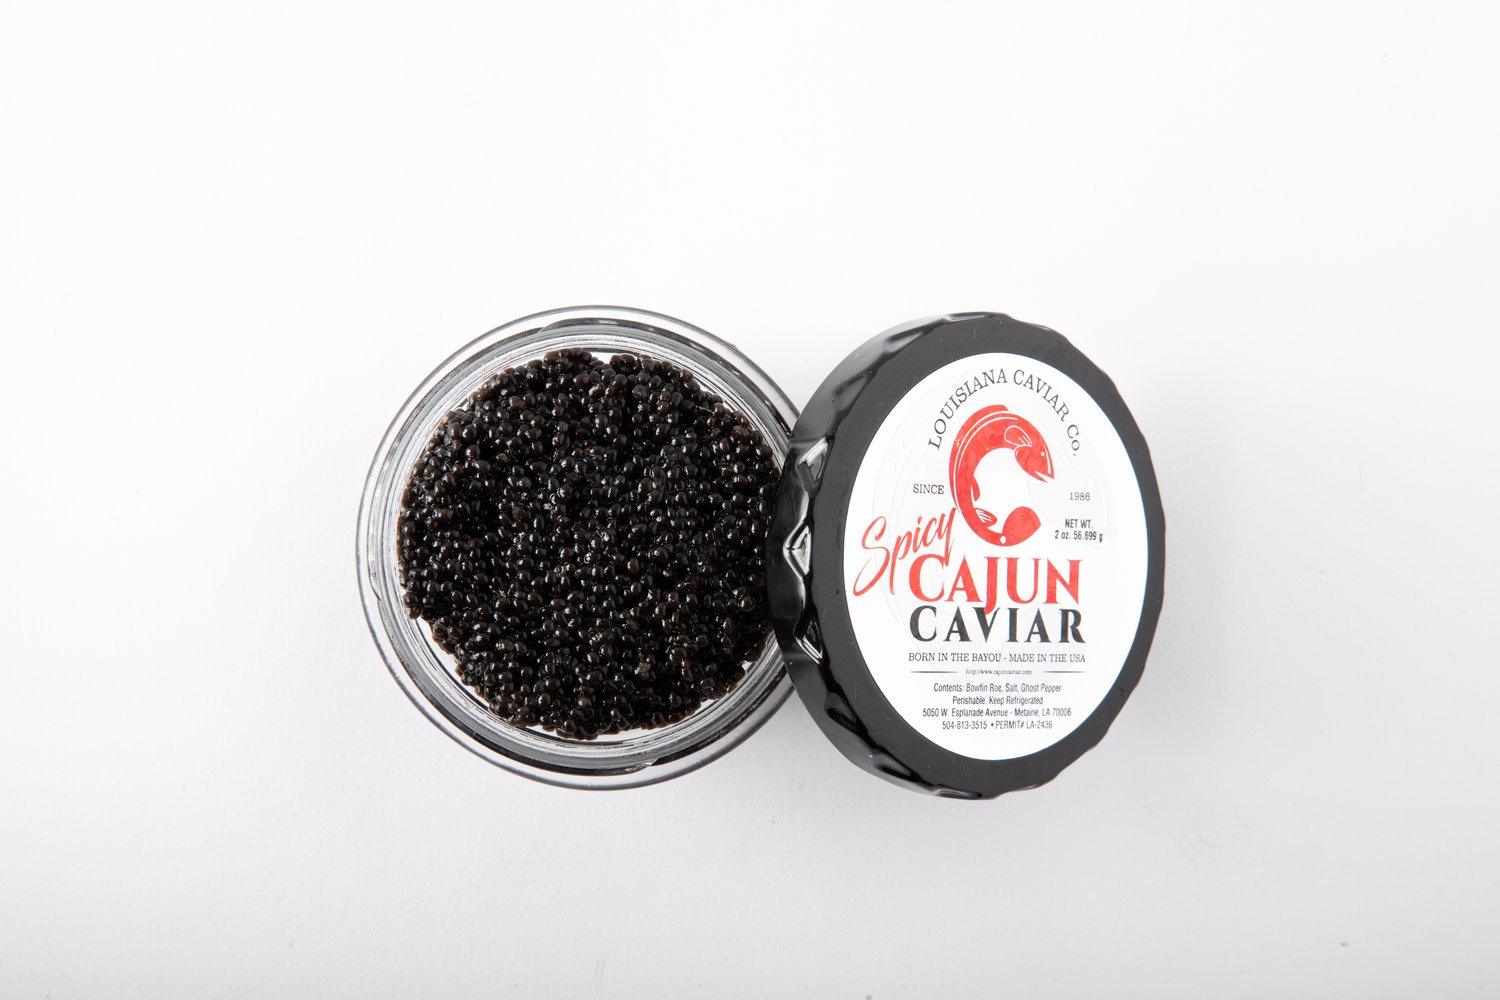 Buy Caviar & Fish Roe Online, Overnight Delivery